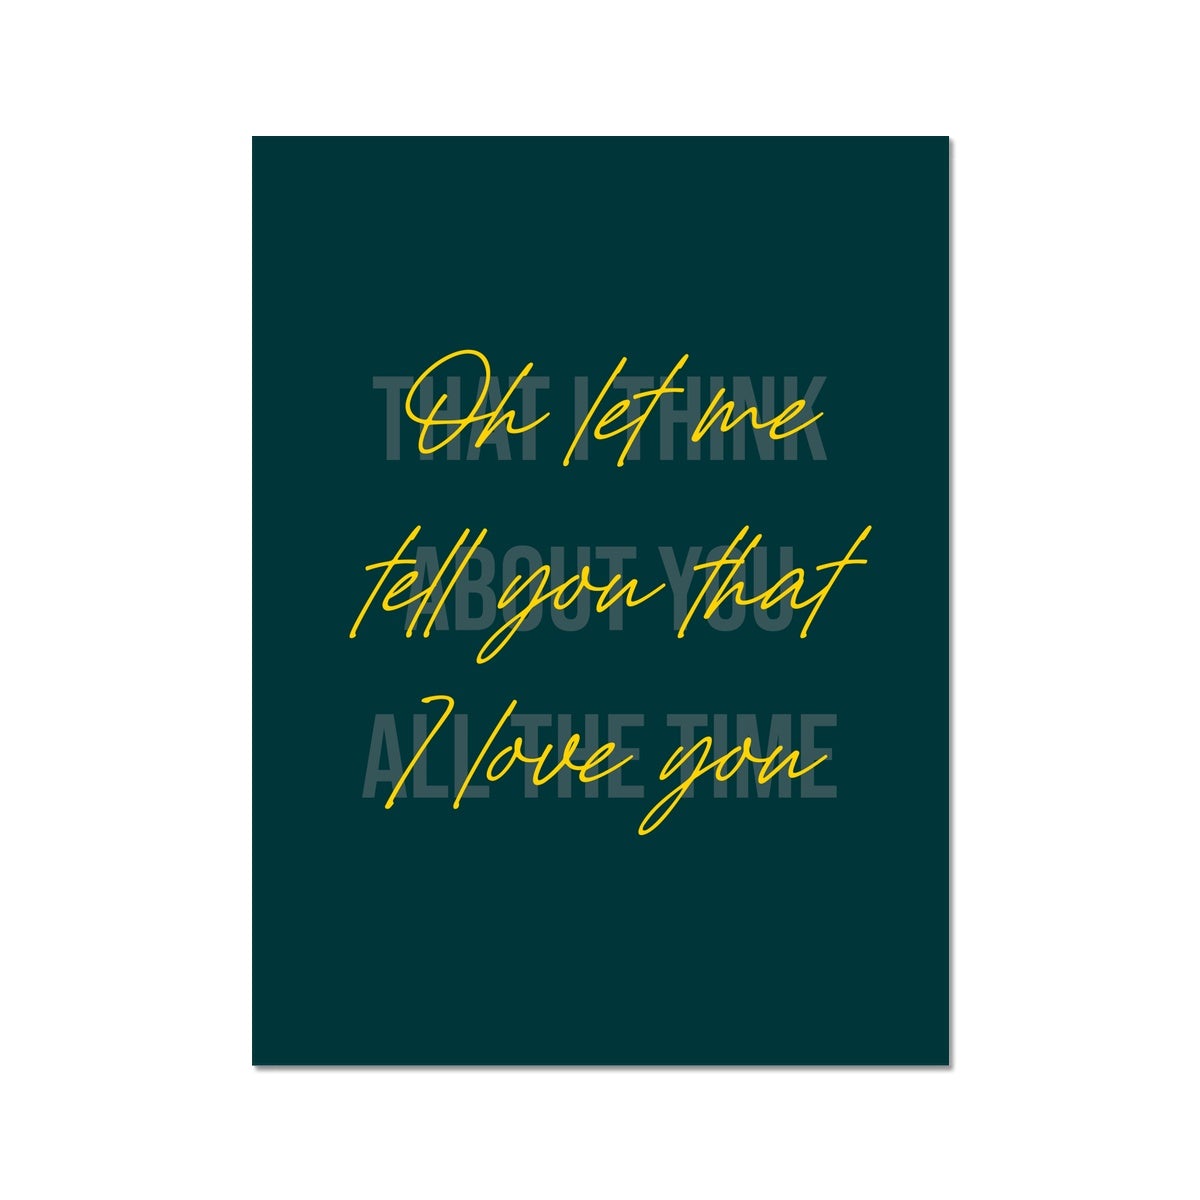 "Oh let me tell you that I love you" (Dark Green)